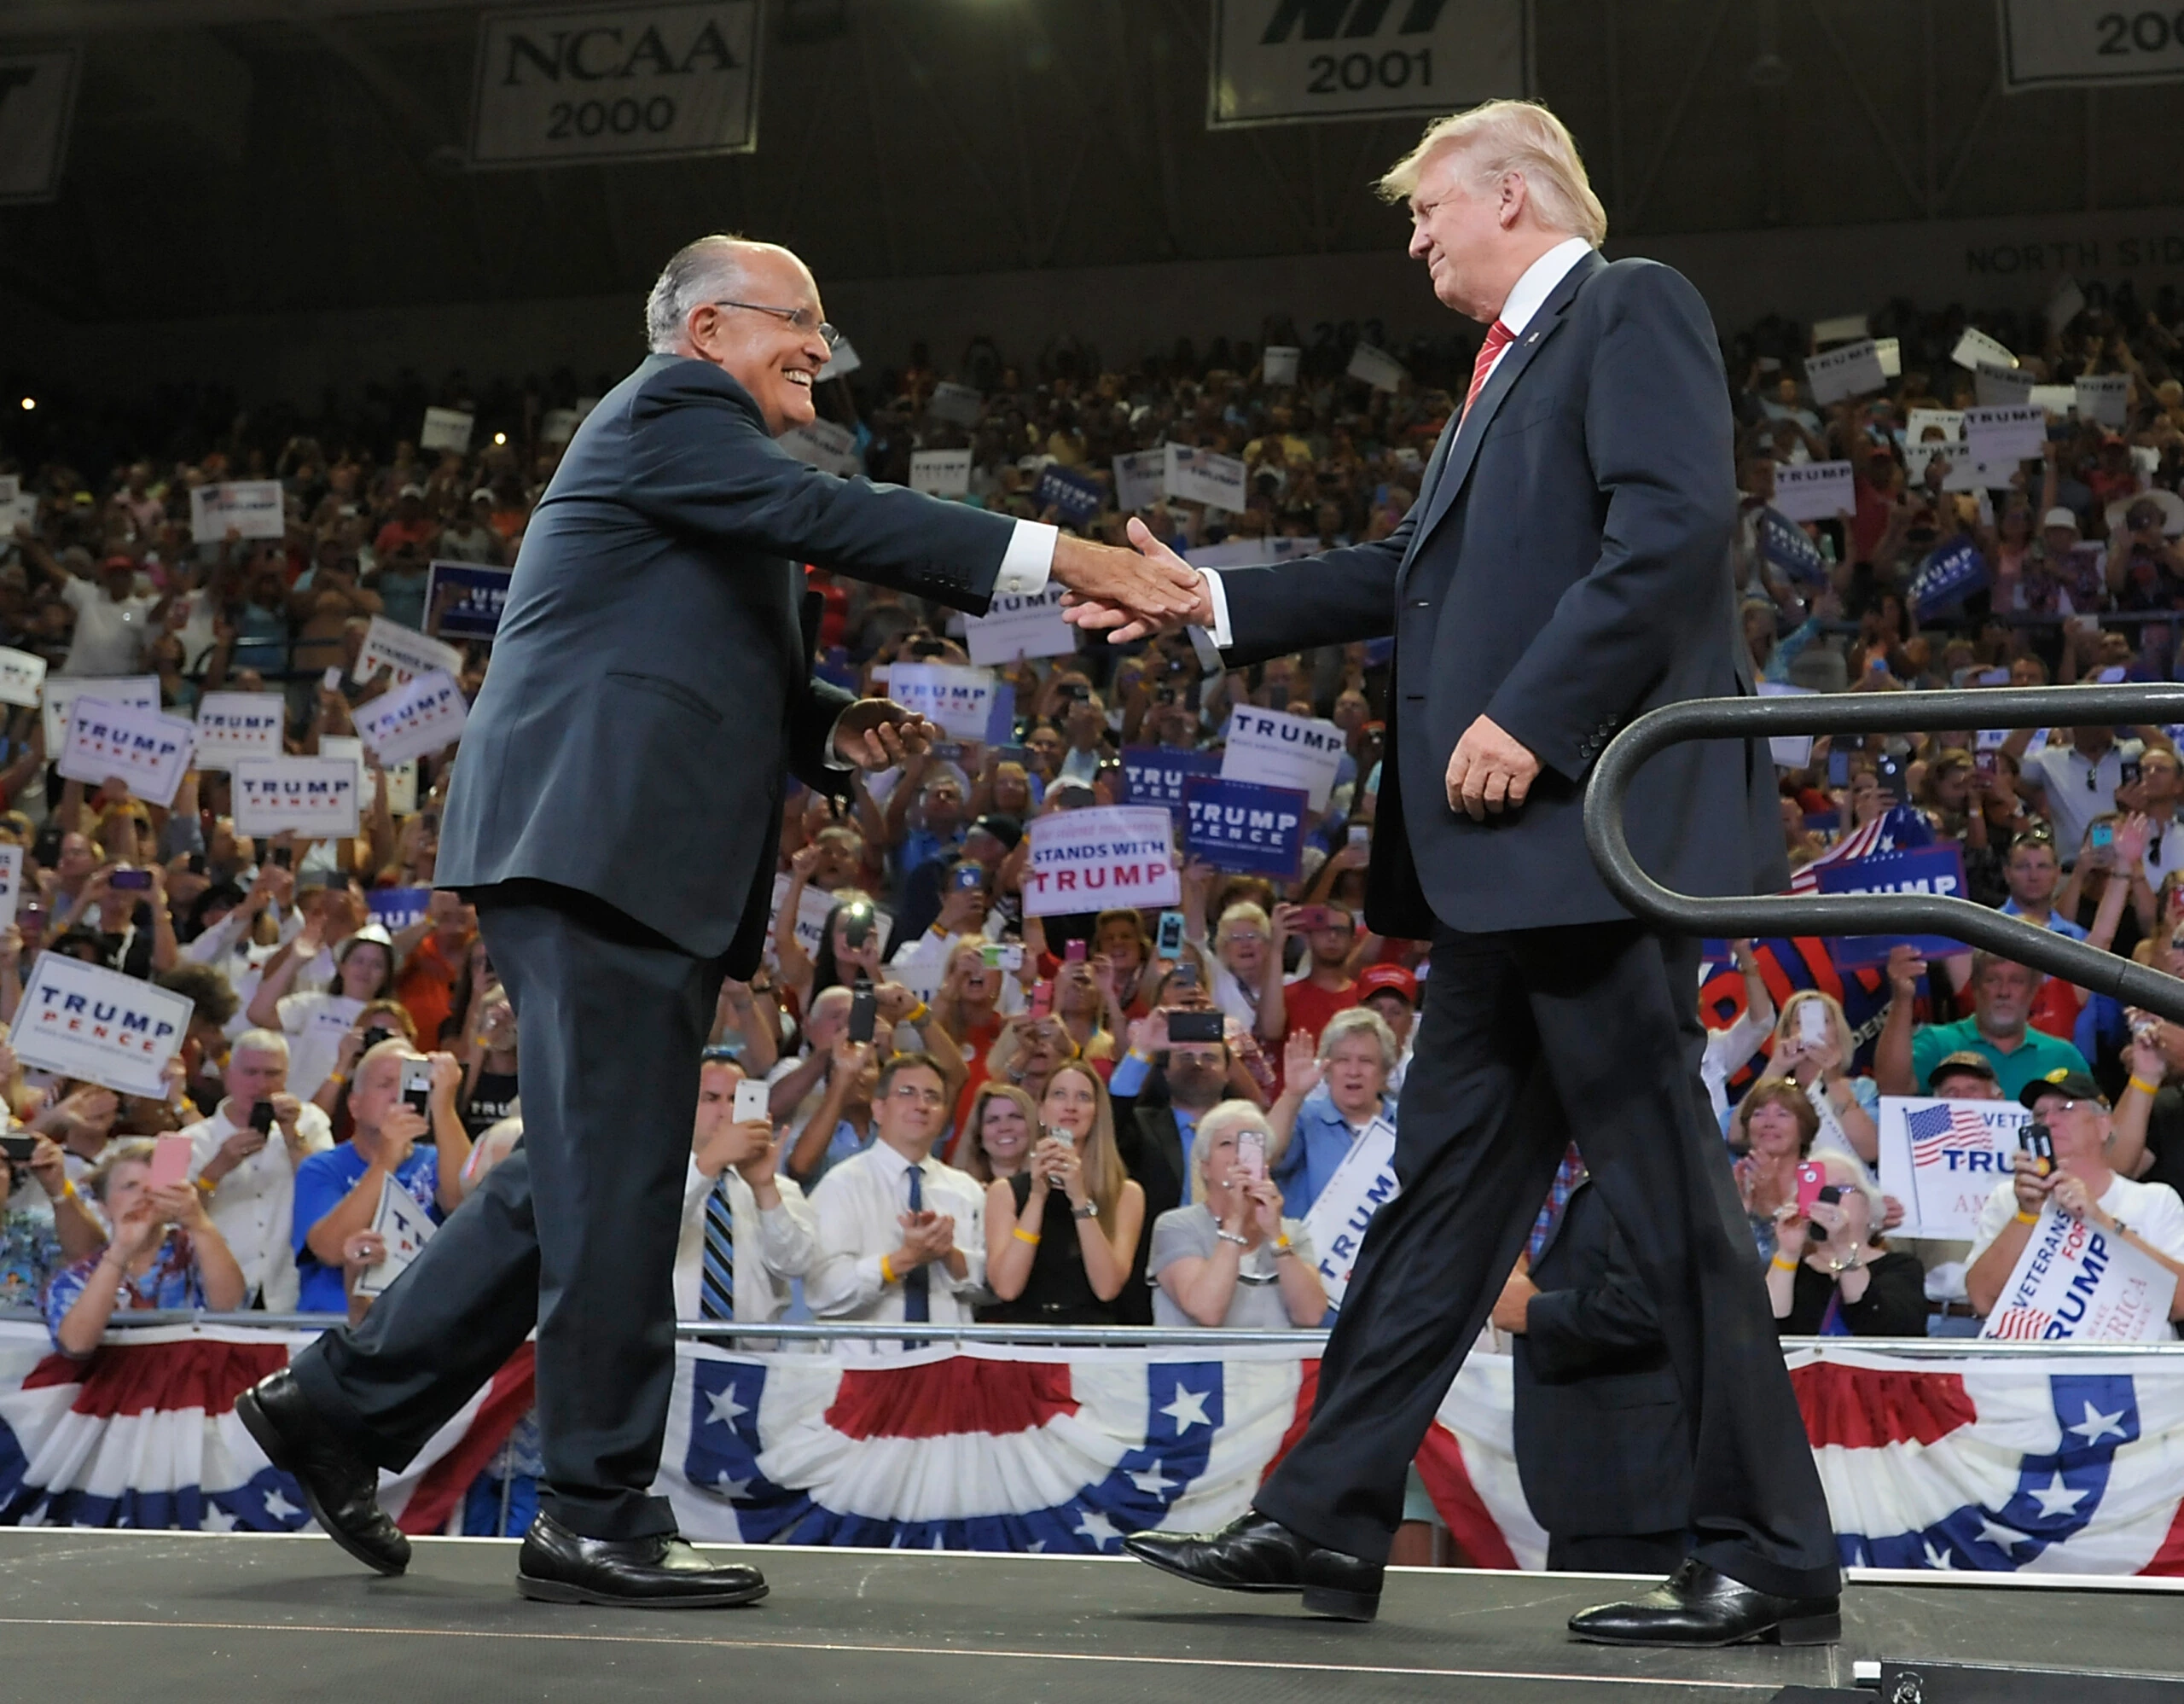 WILMINGTON, NC - AUGUST 9:  Former New York City Mayor Rudy Giuliani introduces Republican presidential candidate Donald Trump during a campaign event at Trask Coliseum on August 9, 2016 in Wilmington, North Carolina. This was Trump's first visit to southeastern North Carolina since he entered the presidential race.  (Photo by Sara D. Davis/Getty Images)